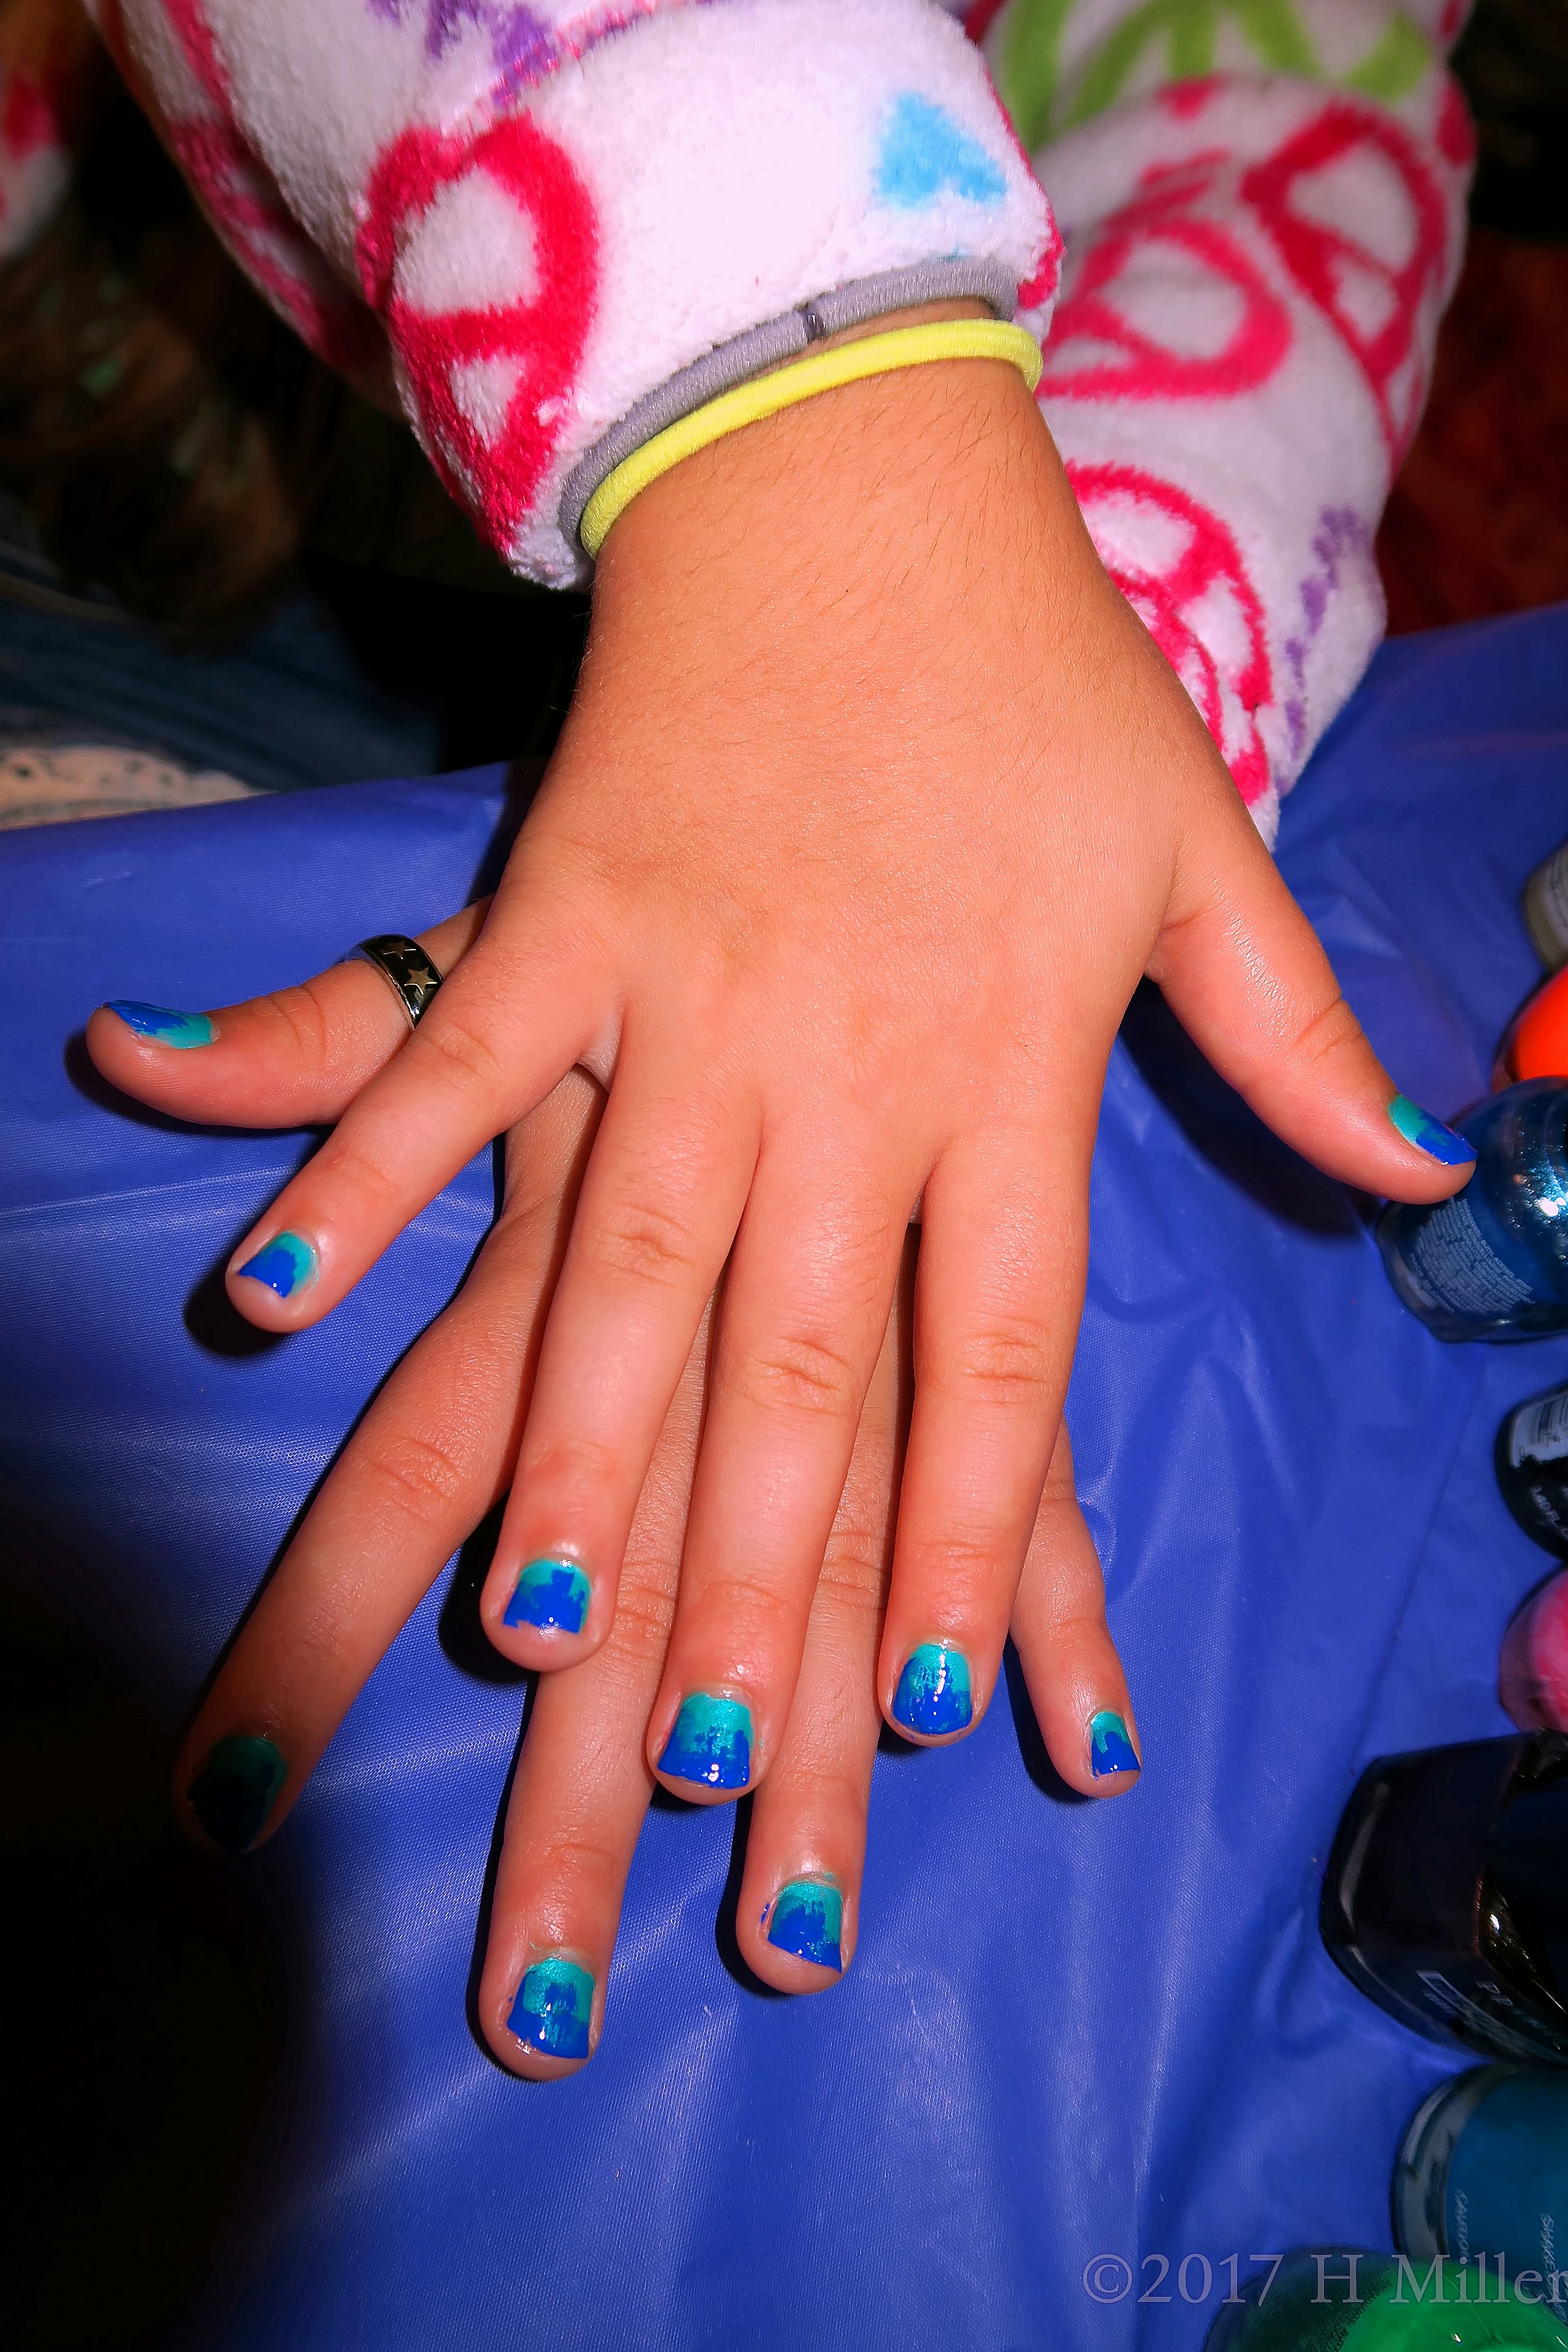 Ombre Effect Is So Stylish On This Kids Manicure. 